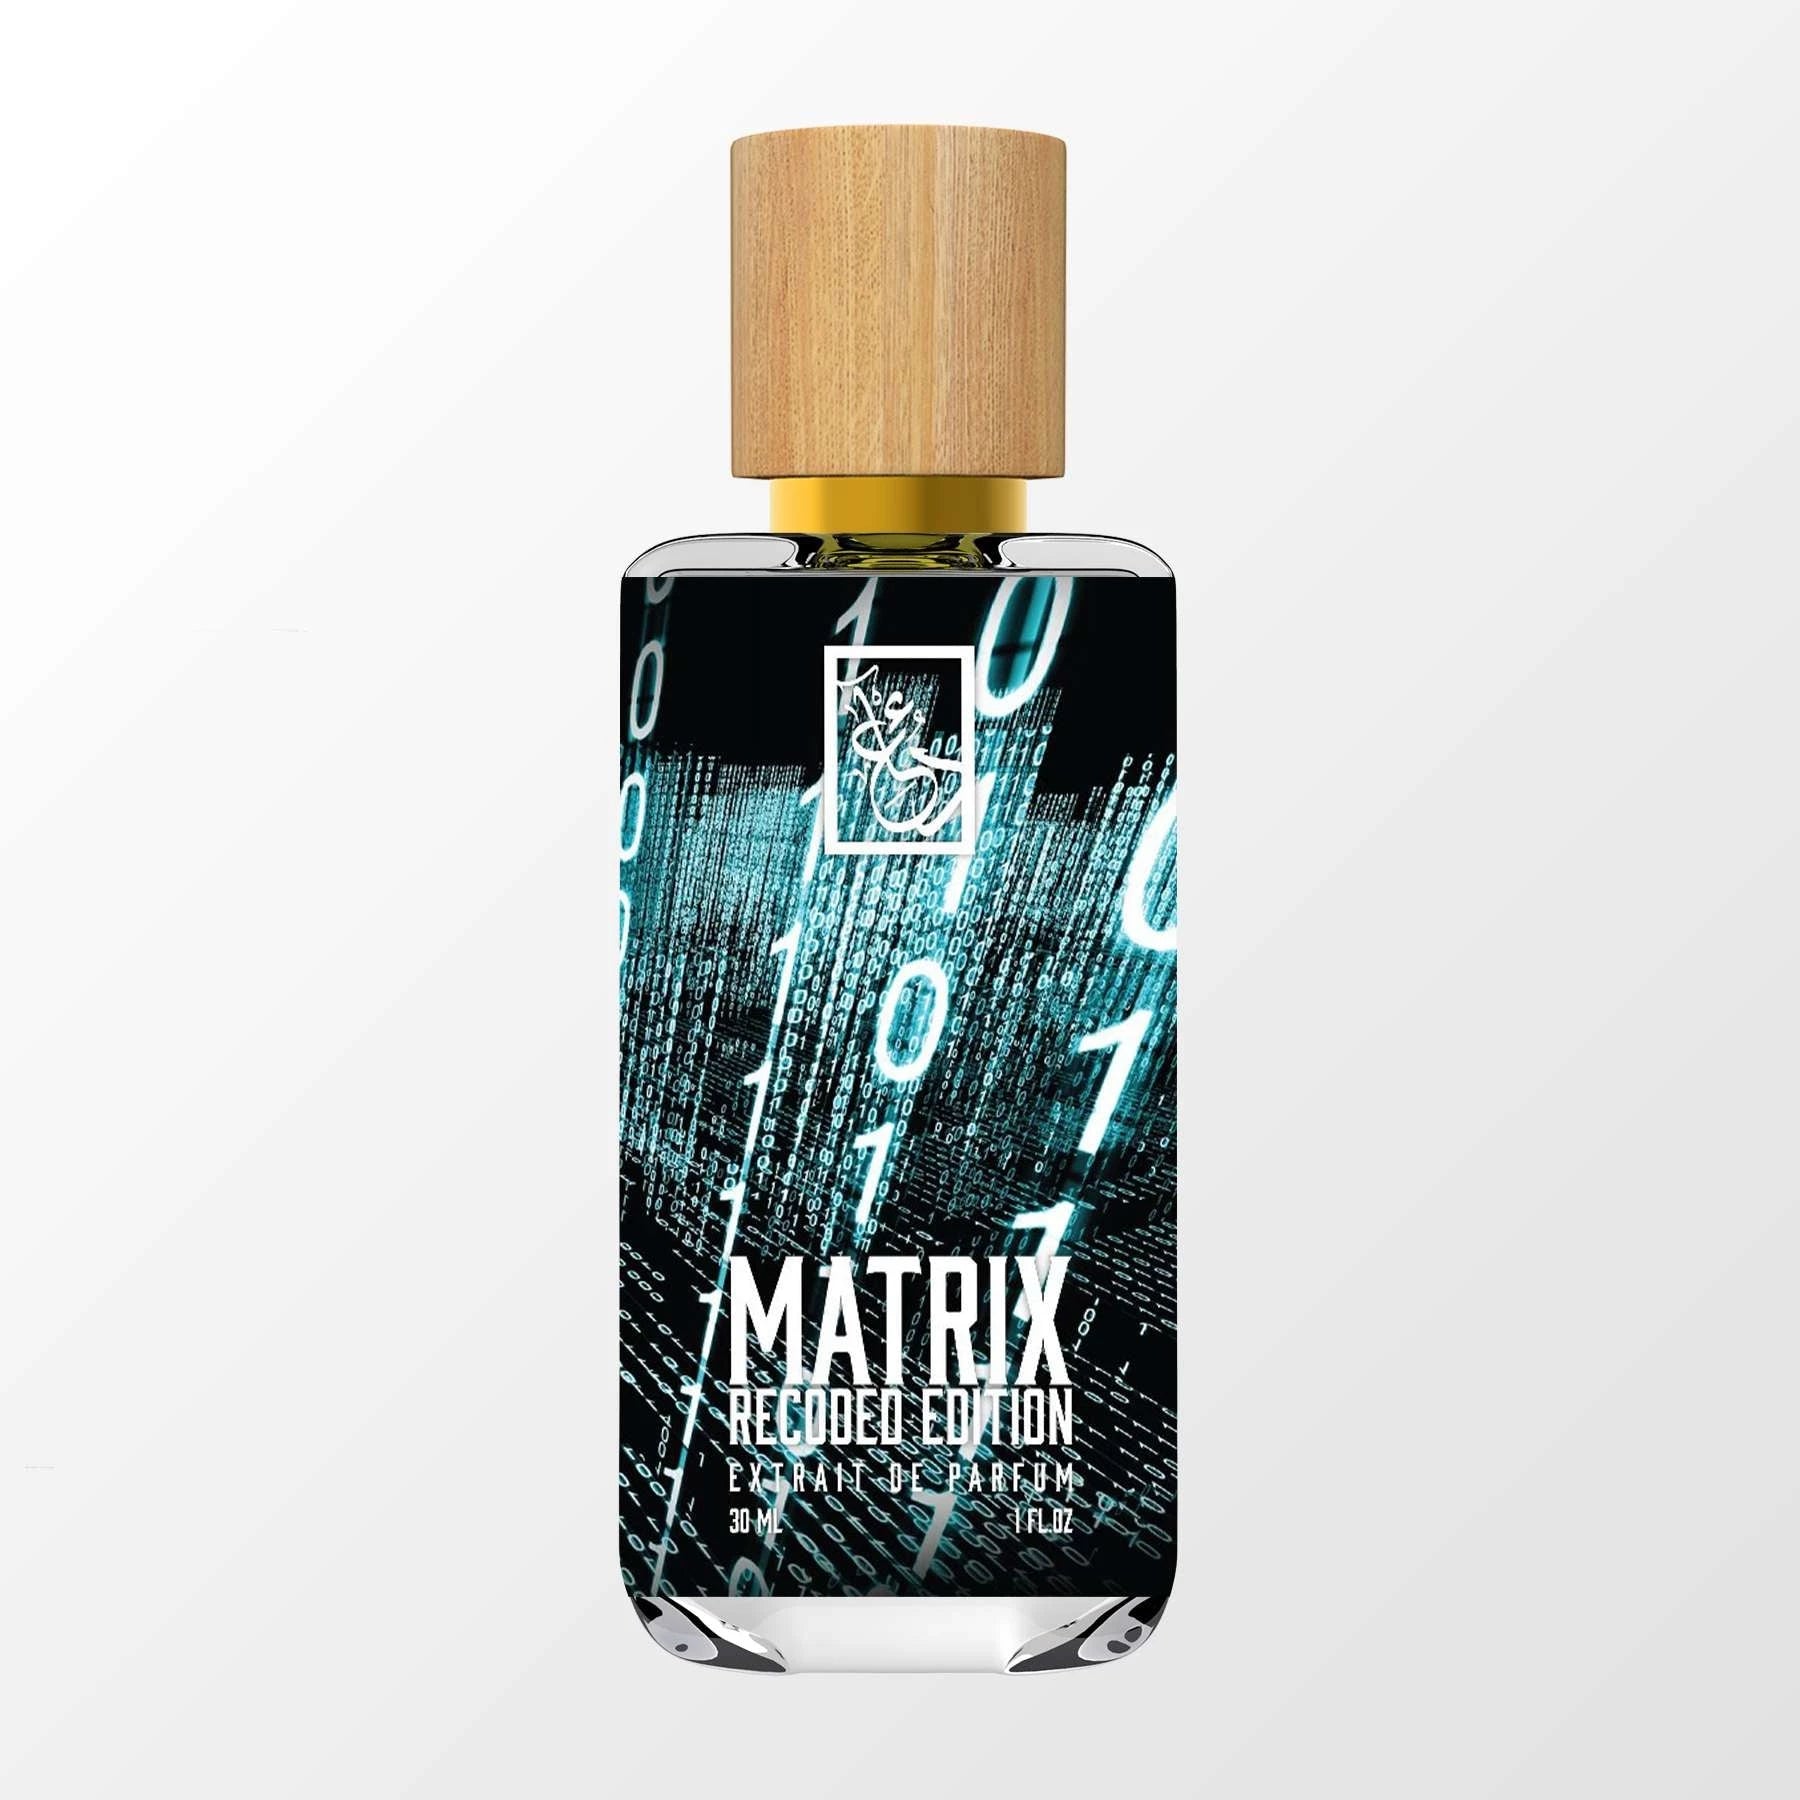 matrix-recoded-edition-front